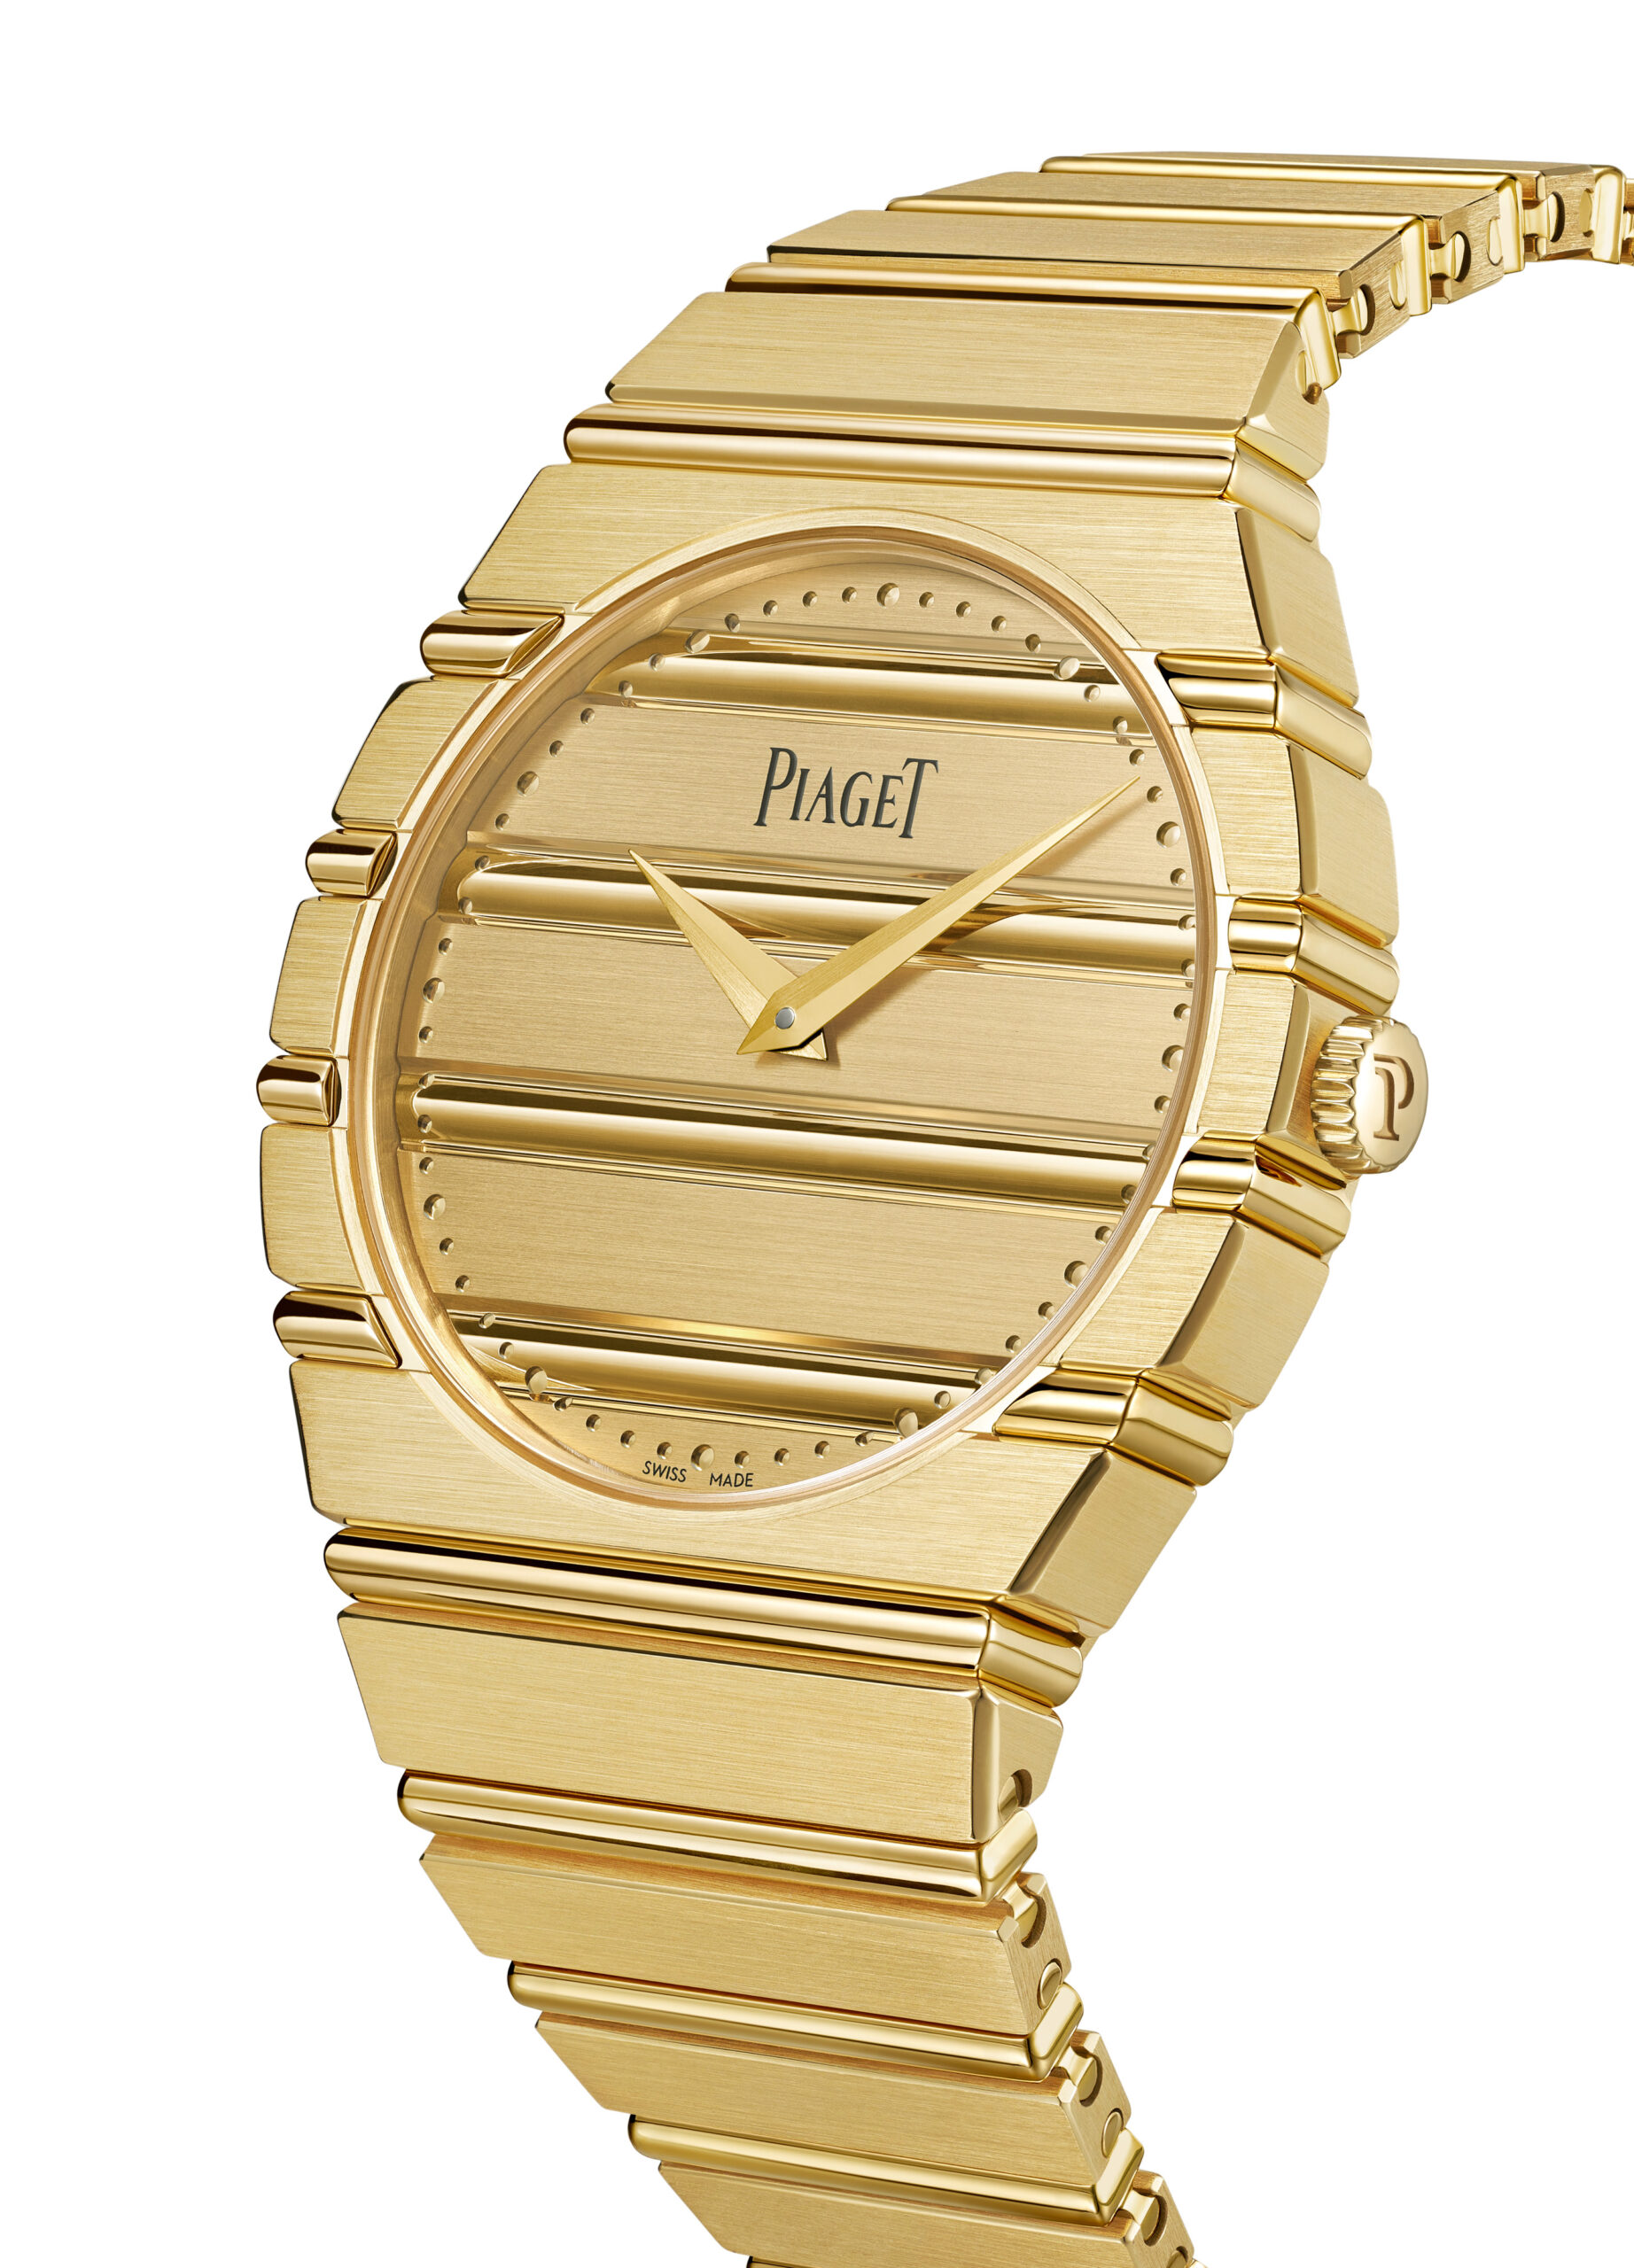 Piaget’s Polo 79: A Luxurious Revival of Elegance and Extravagance